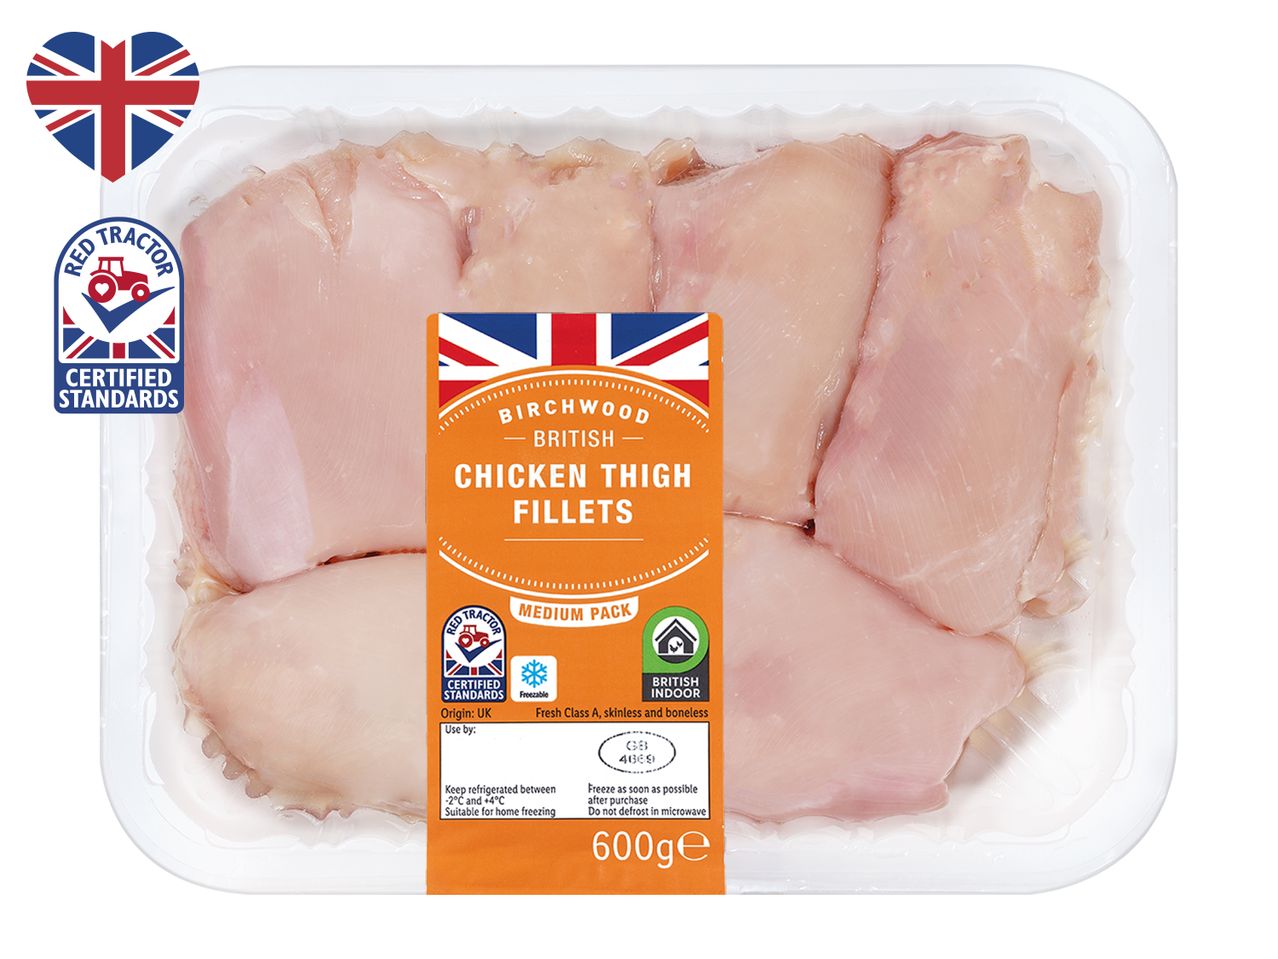 Go to full screen view: Birchwood Chicken Thigh Fillet - Image 1